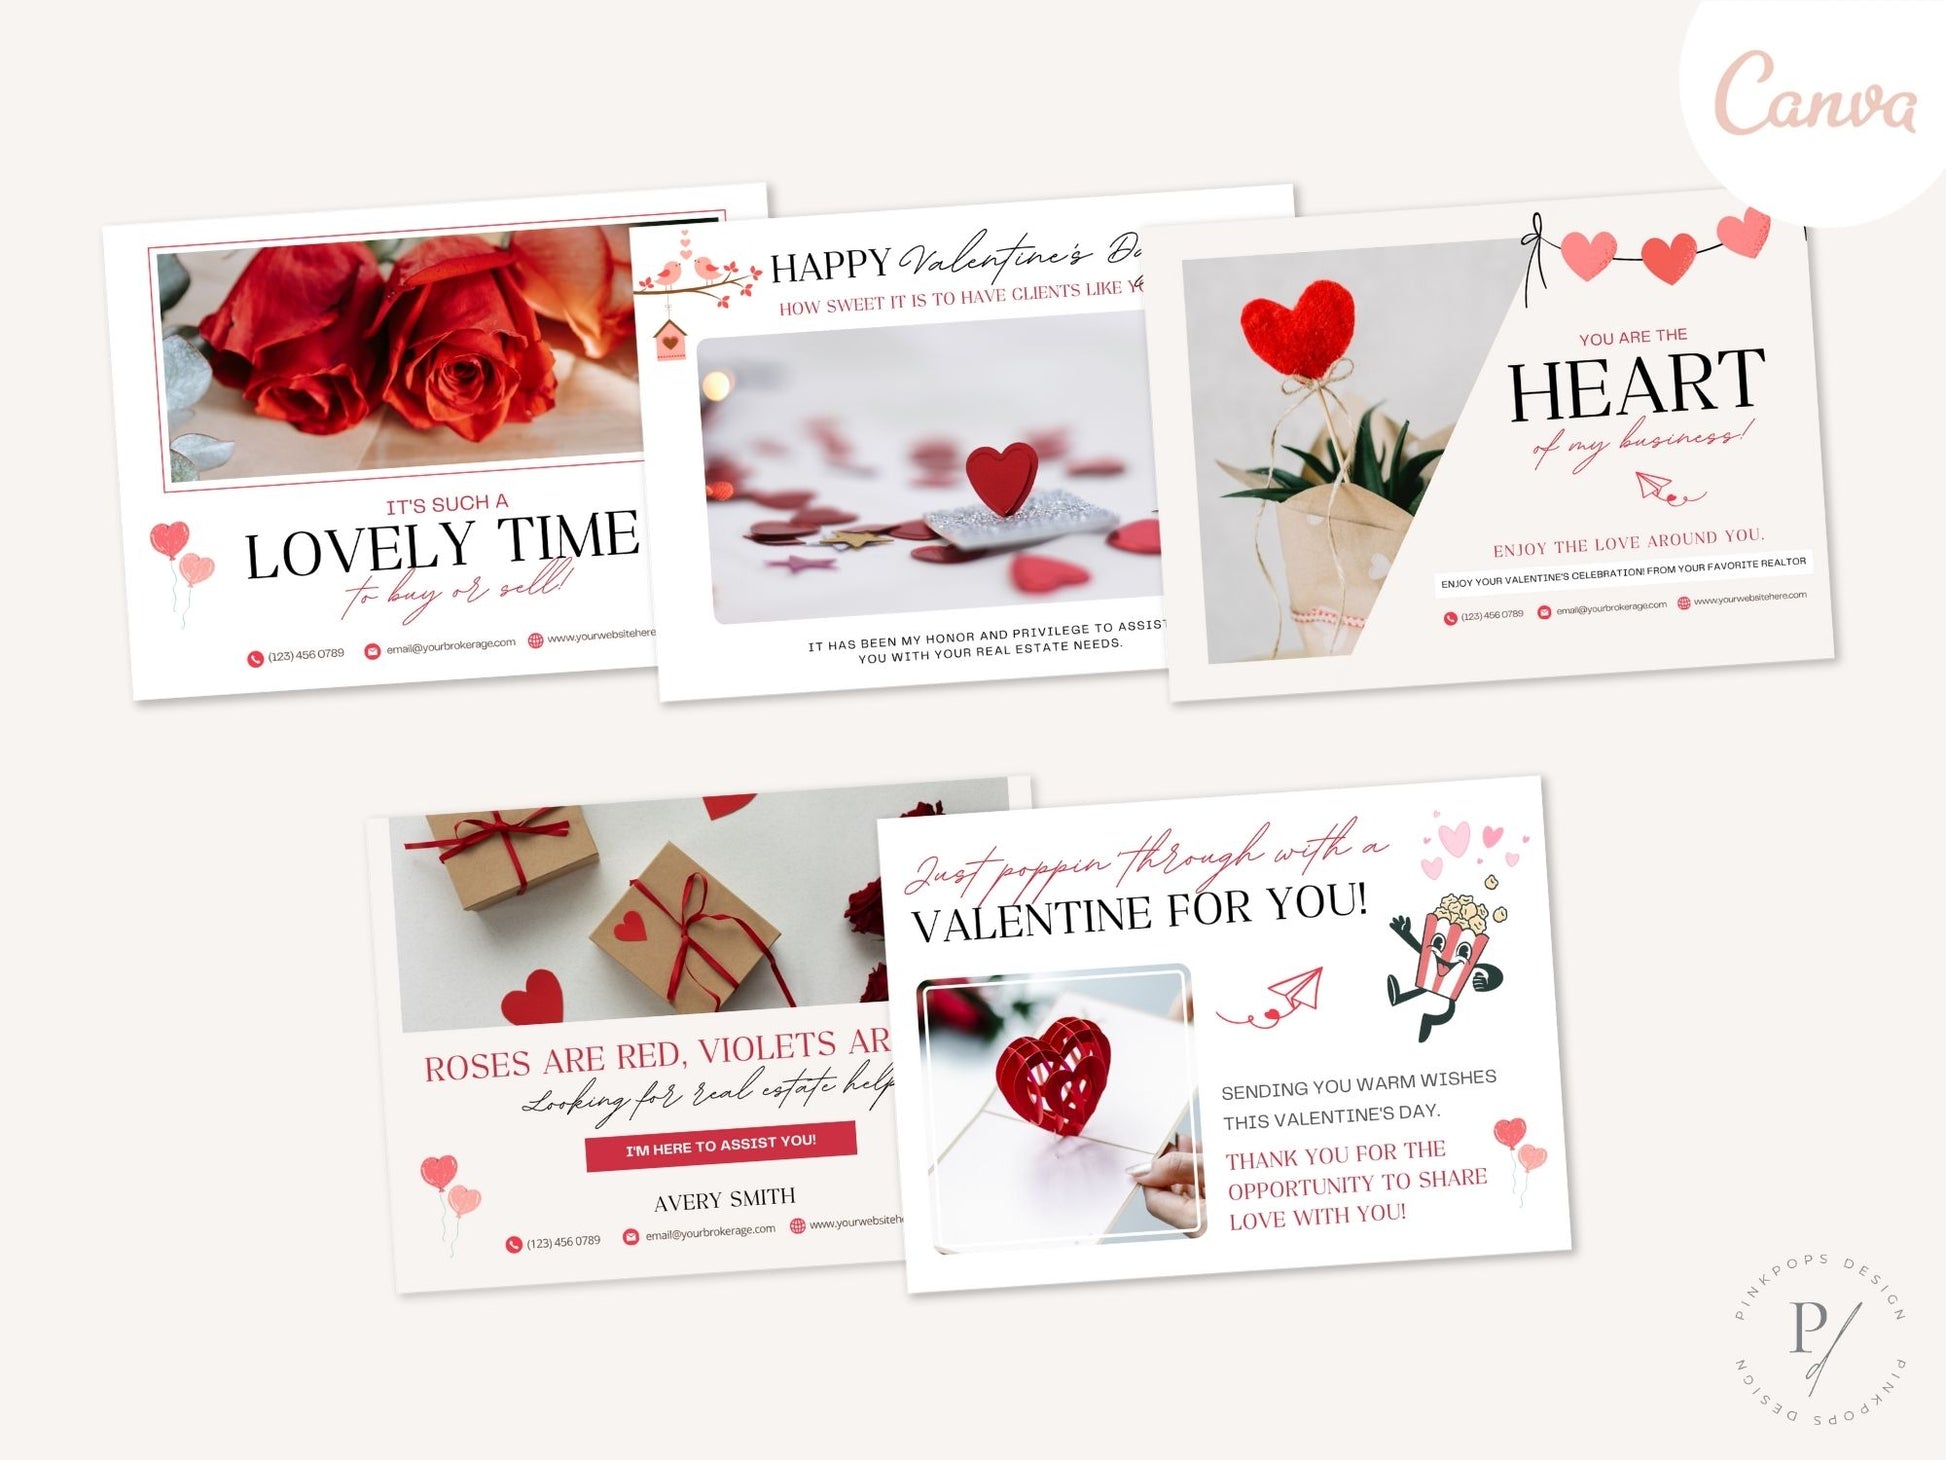 Valentine Postcard Bundle - Professionally designed real estate postcards with a touch of Valentine's charm for impactful marketing.